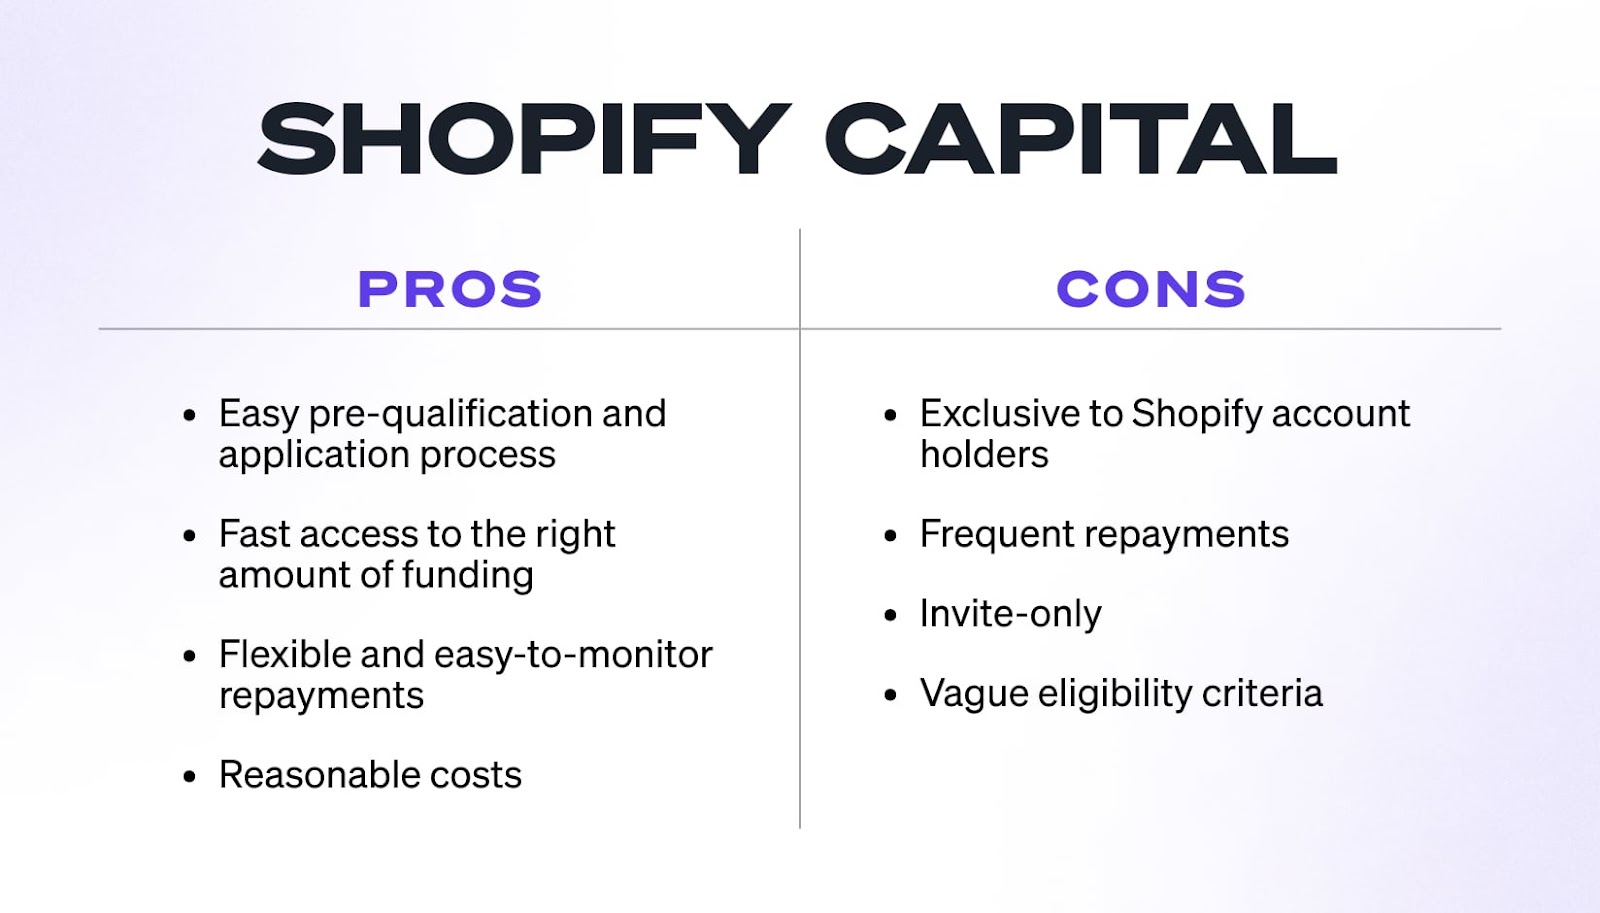 shopify capital pros and cons